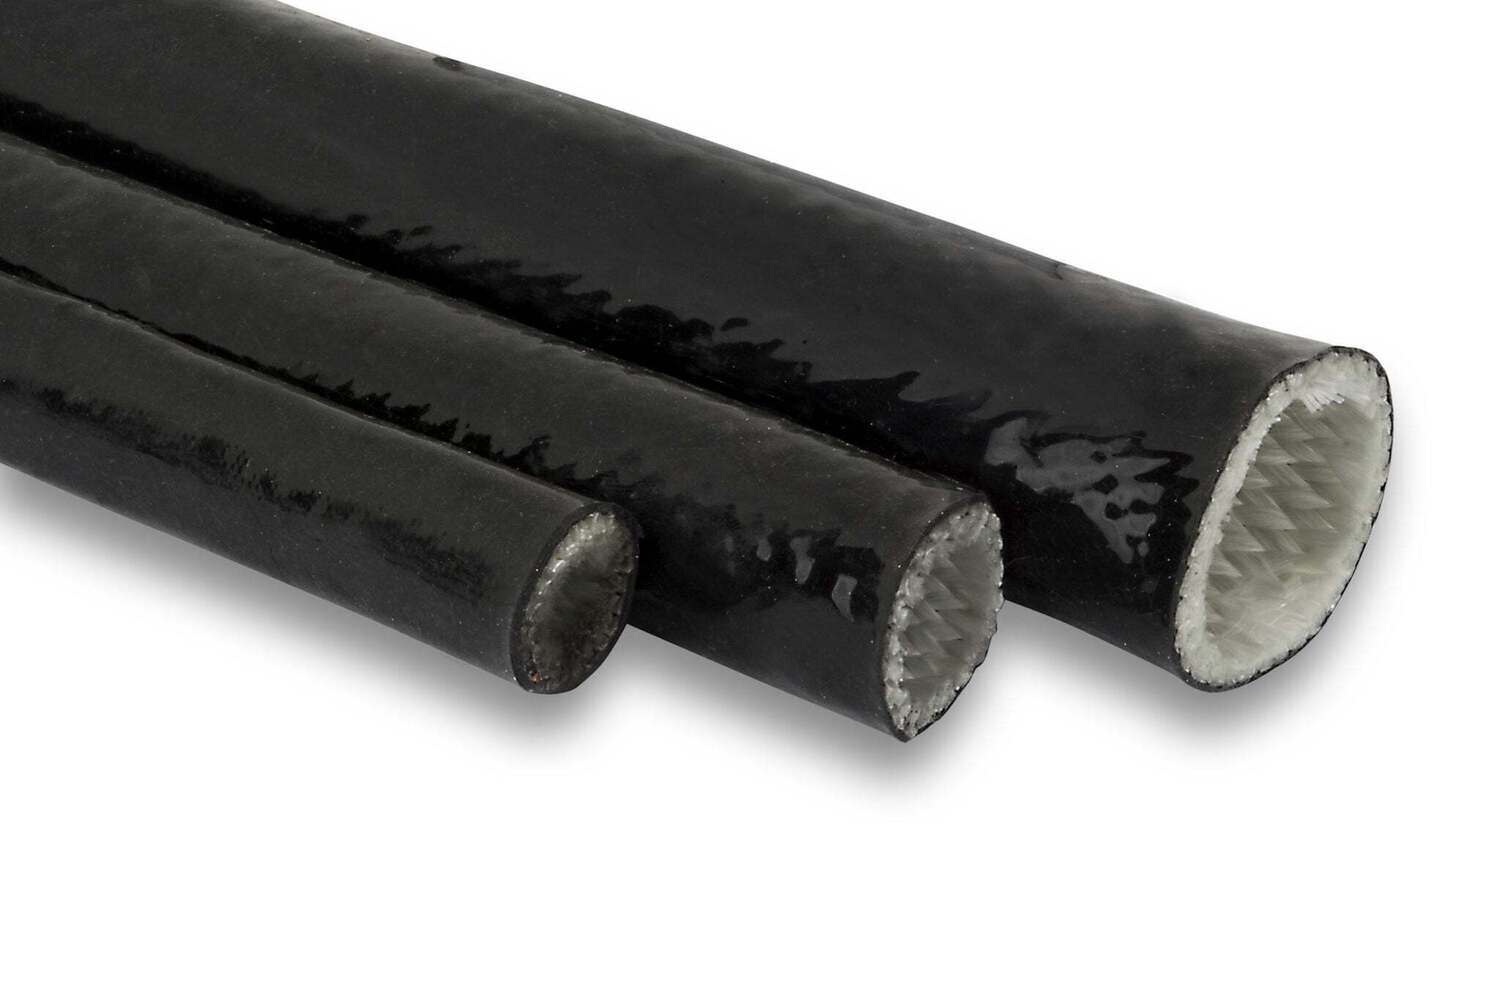 Black Silicon High Heat Sleeve - AN4 (Utilises 7mm Sleeving), 5.0m Multiple Qty will come on a continuous Roll